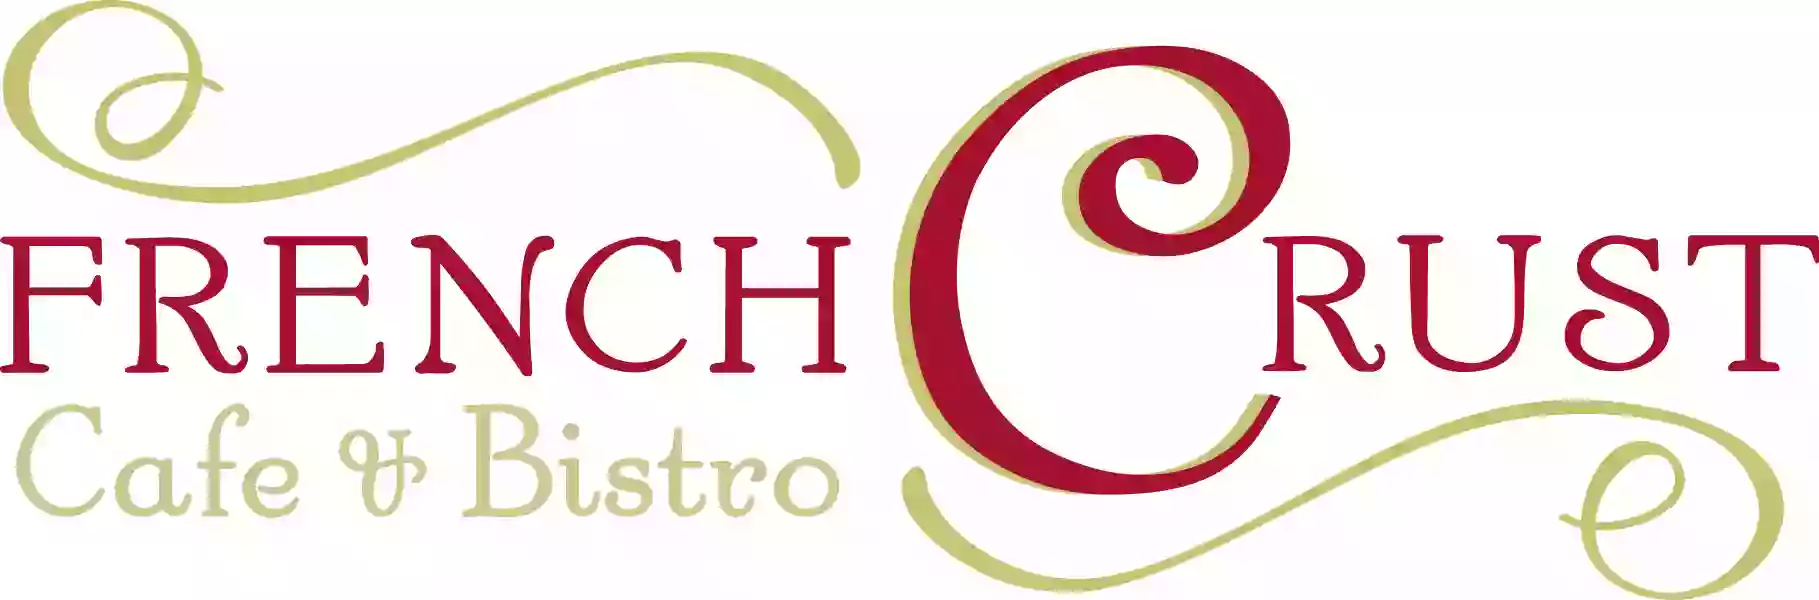 French Crust Café and Bistro